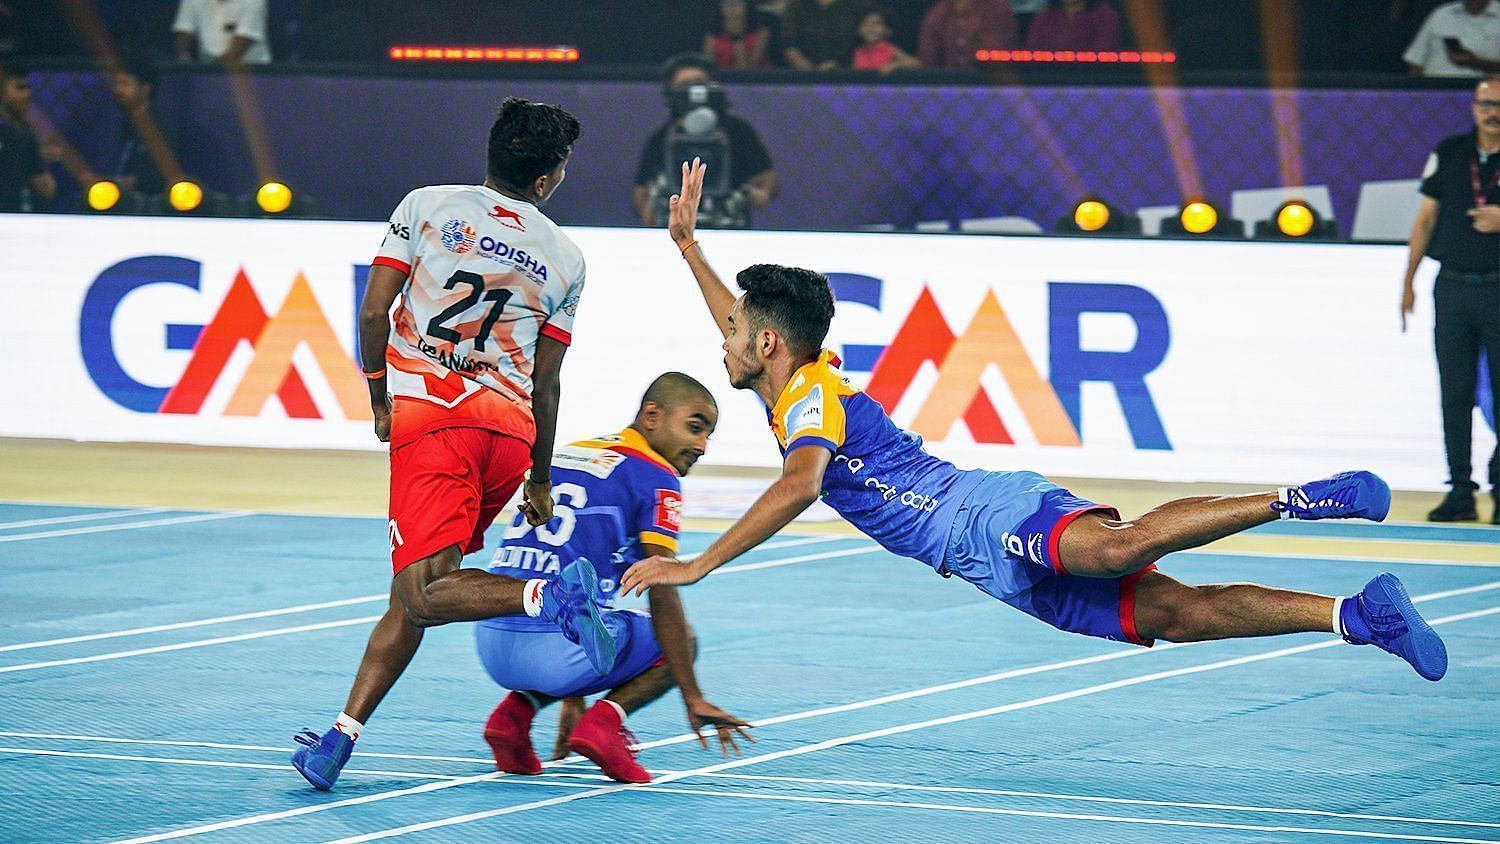 Players in action in the first edition of the league, Image Courtesy- Twitter